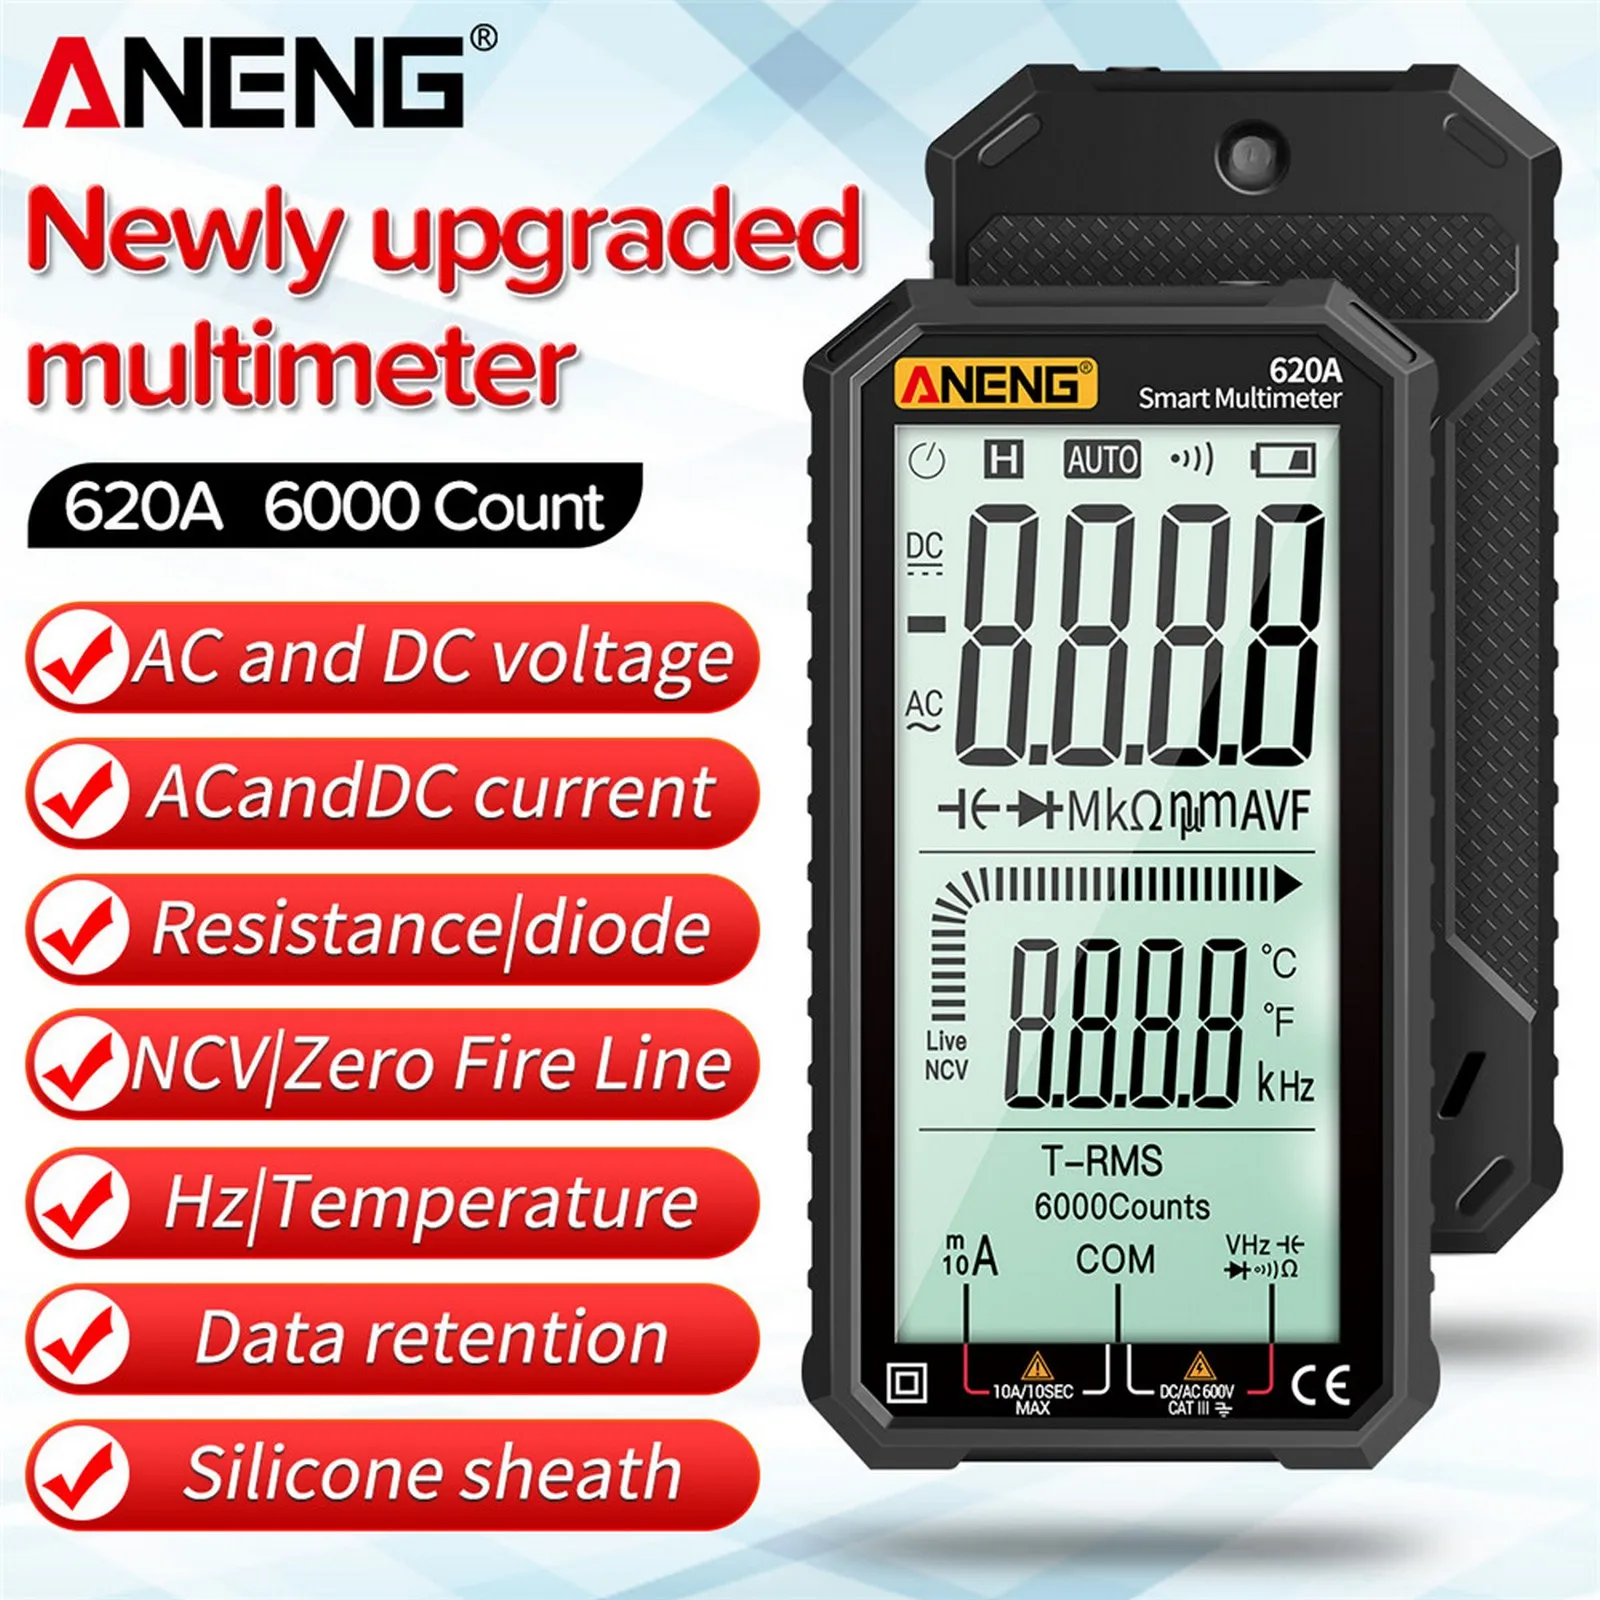 

ANENG Digital Multimeter 620A 4.7-Inch LCD Display AC/DC Ultraportable True-RMS Auto-Ranging Multi Tester NCV Test